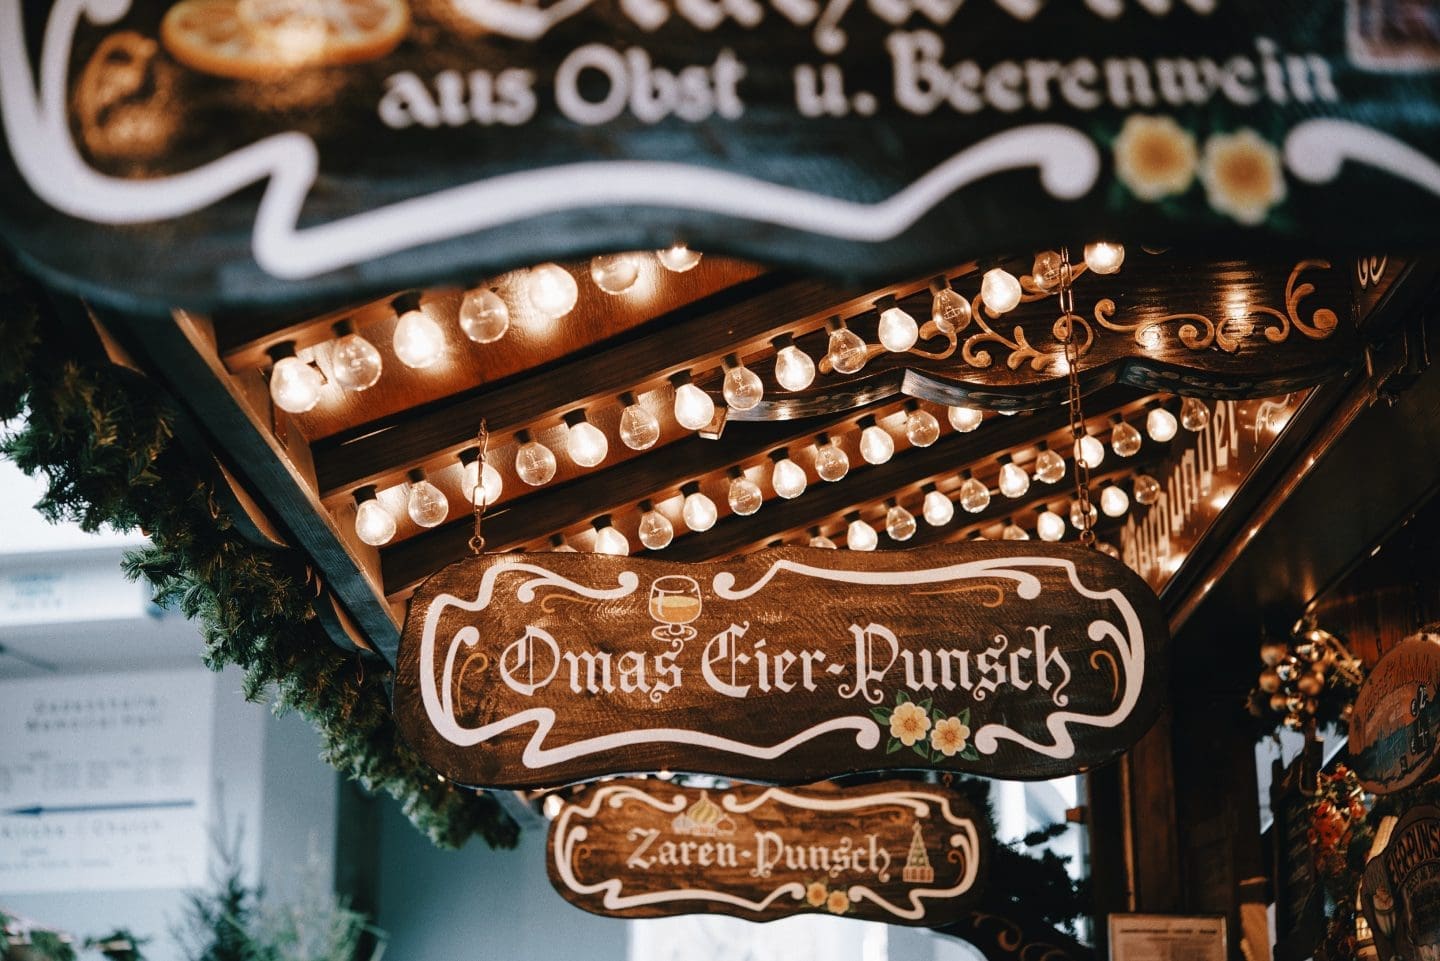 The 5 best Christmas Markets in Germany in 2019